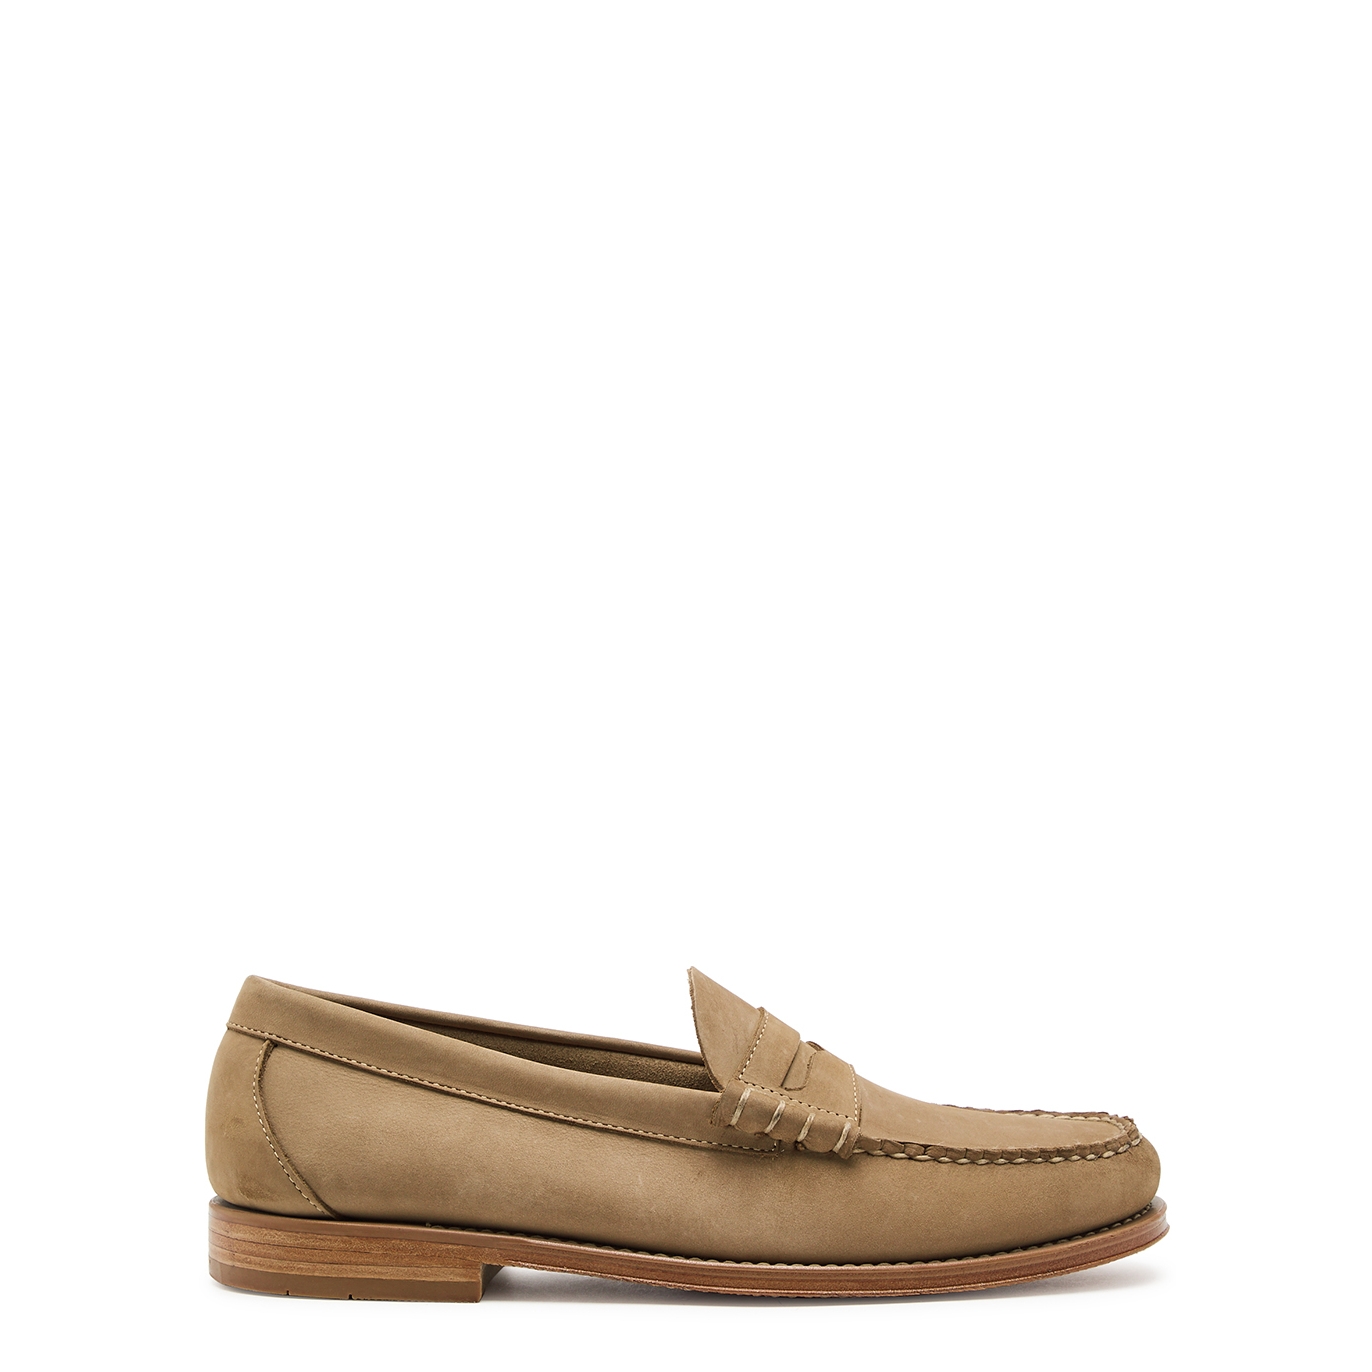 G.H Bass & Co Heritage Nubuck Loafers